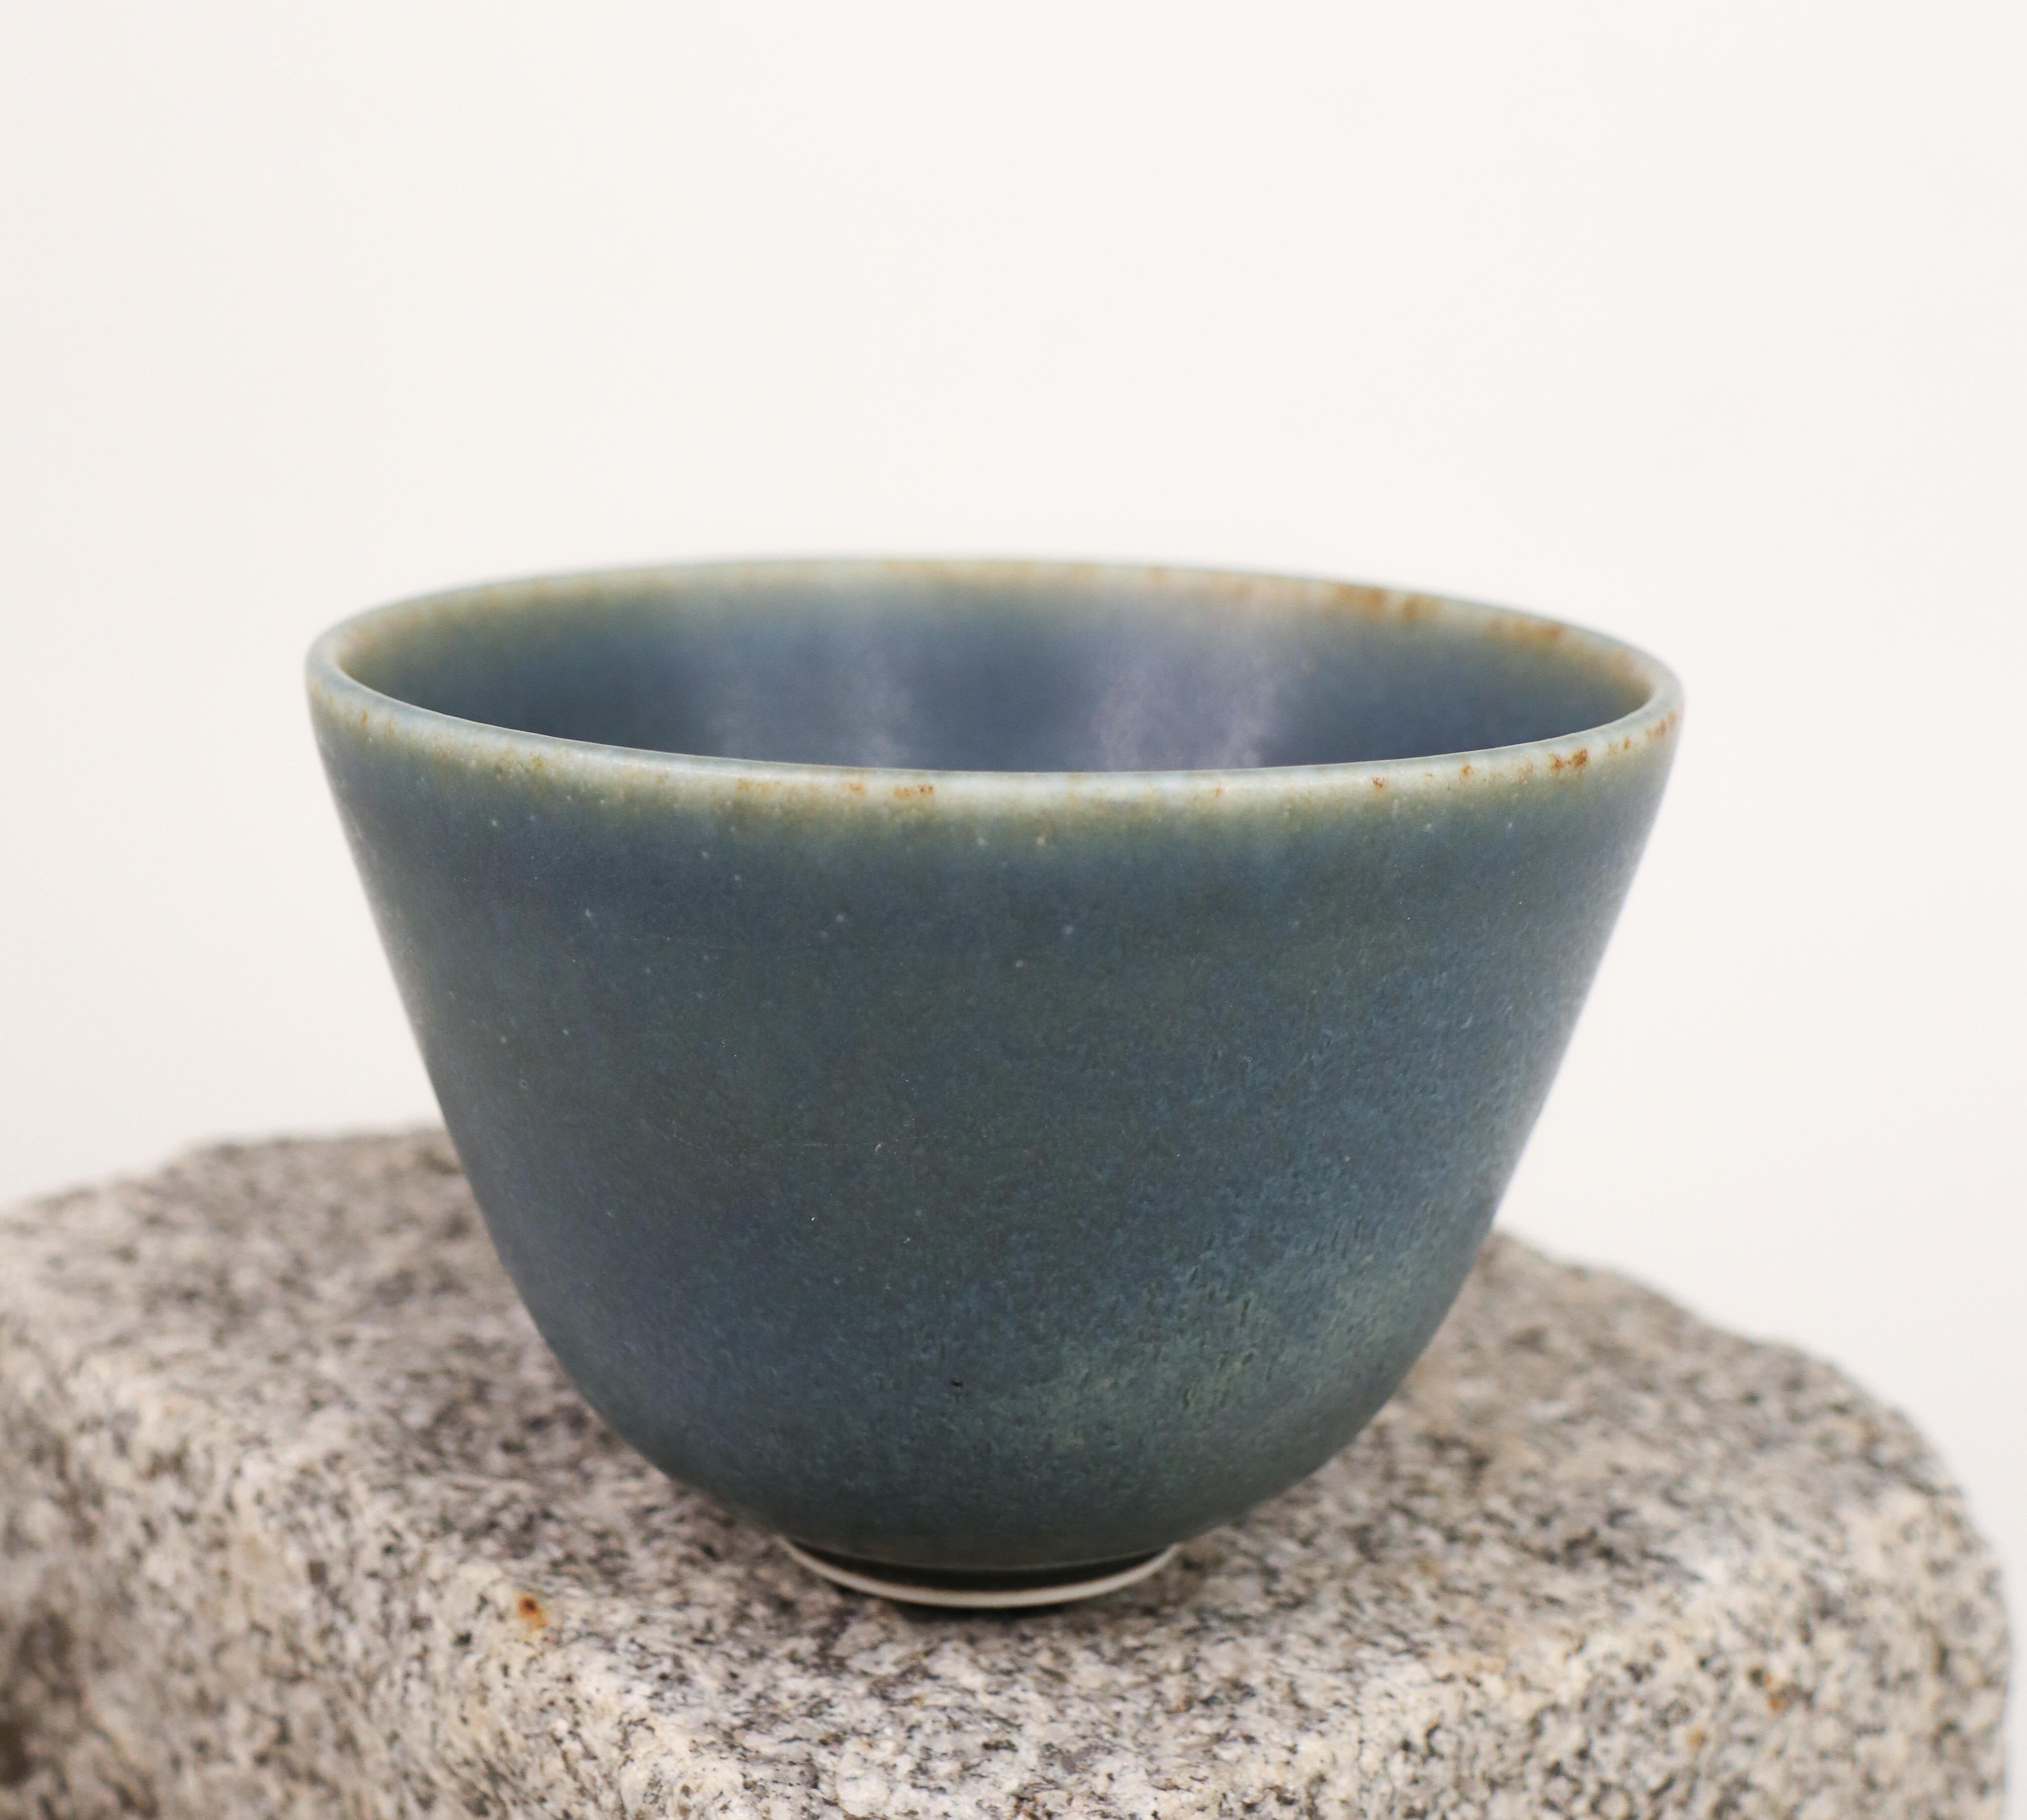 A blue, round bowl designed by Gunnar Nylund at Rörstrand, the bowl is 12.5 cm (5